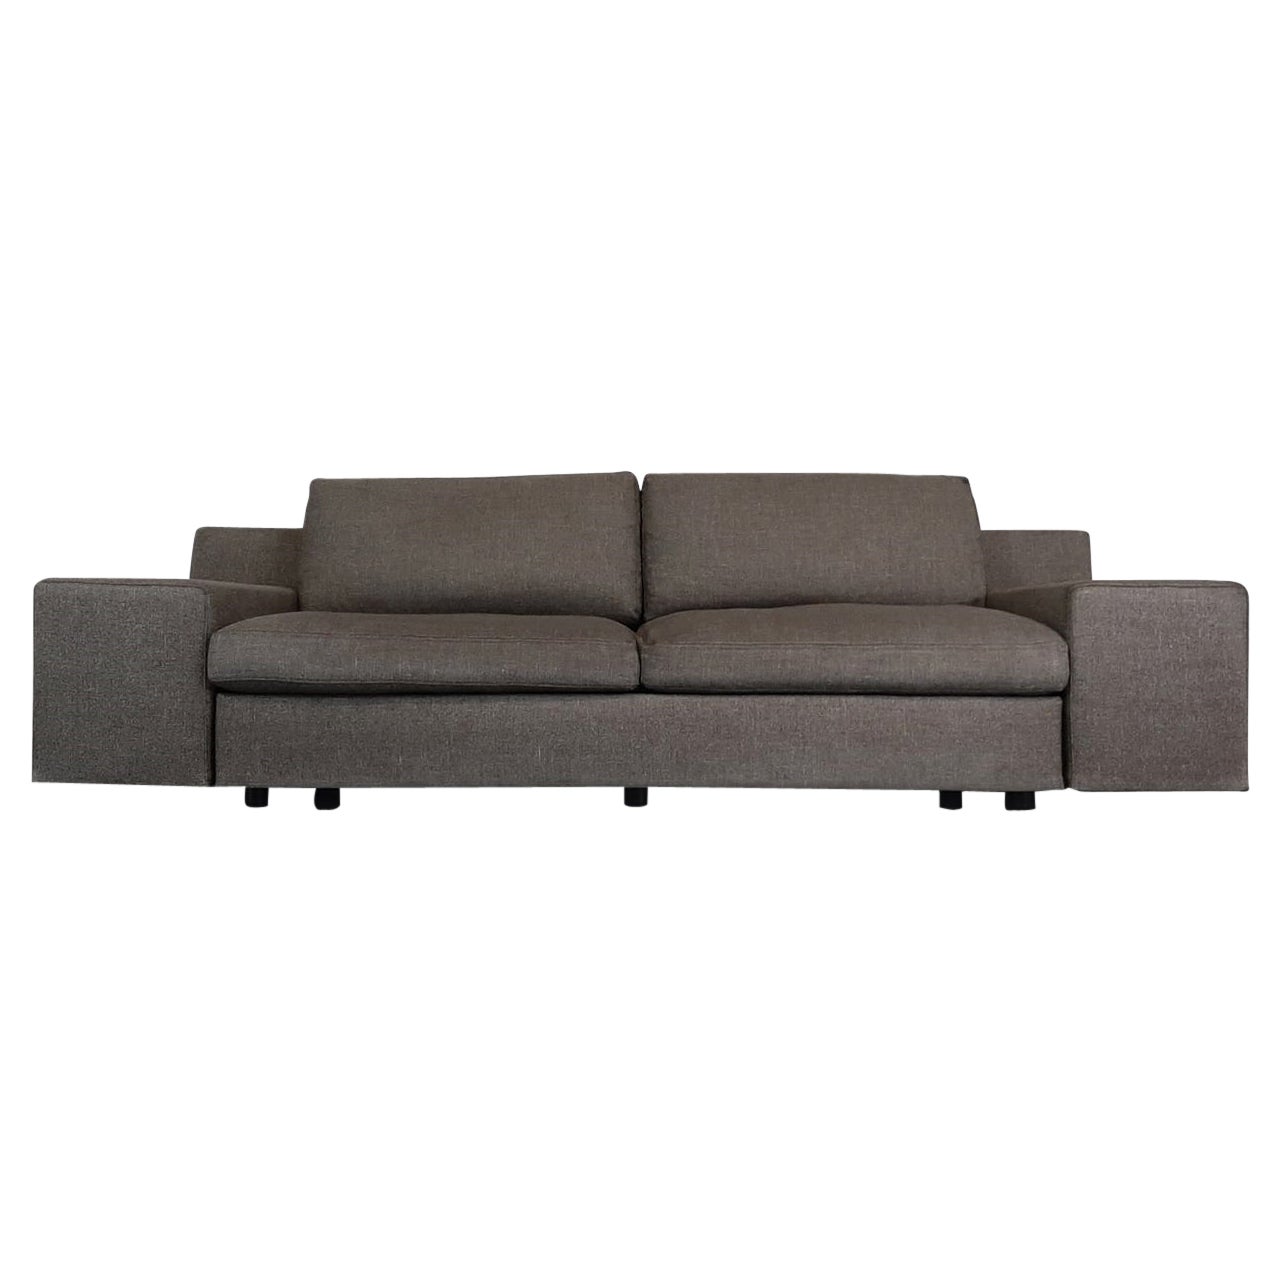 Contemporary 235-236 Mister 2, 5 Seater Sofa by Philippe Starck for Cassina 2004